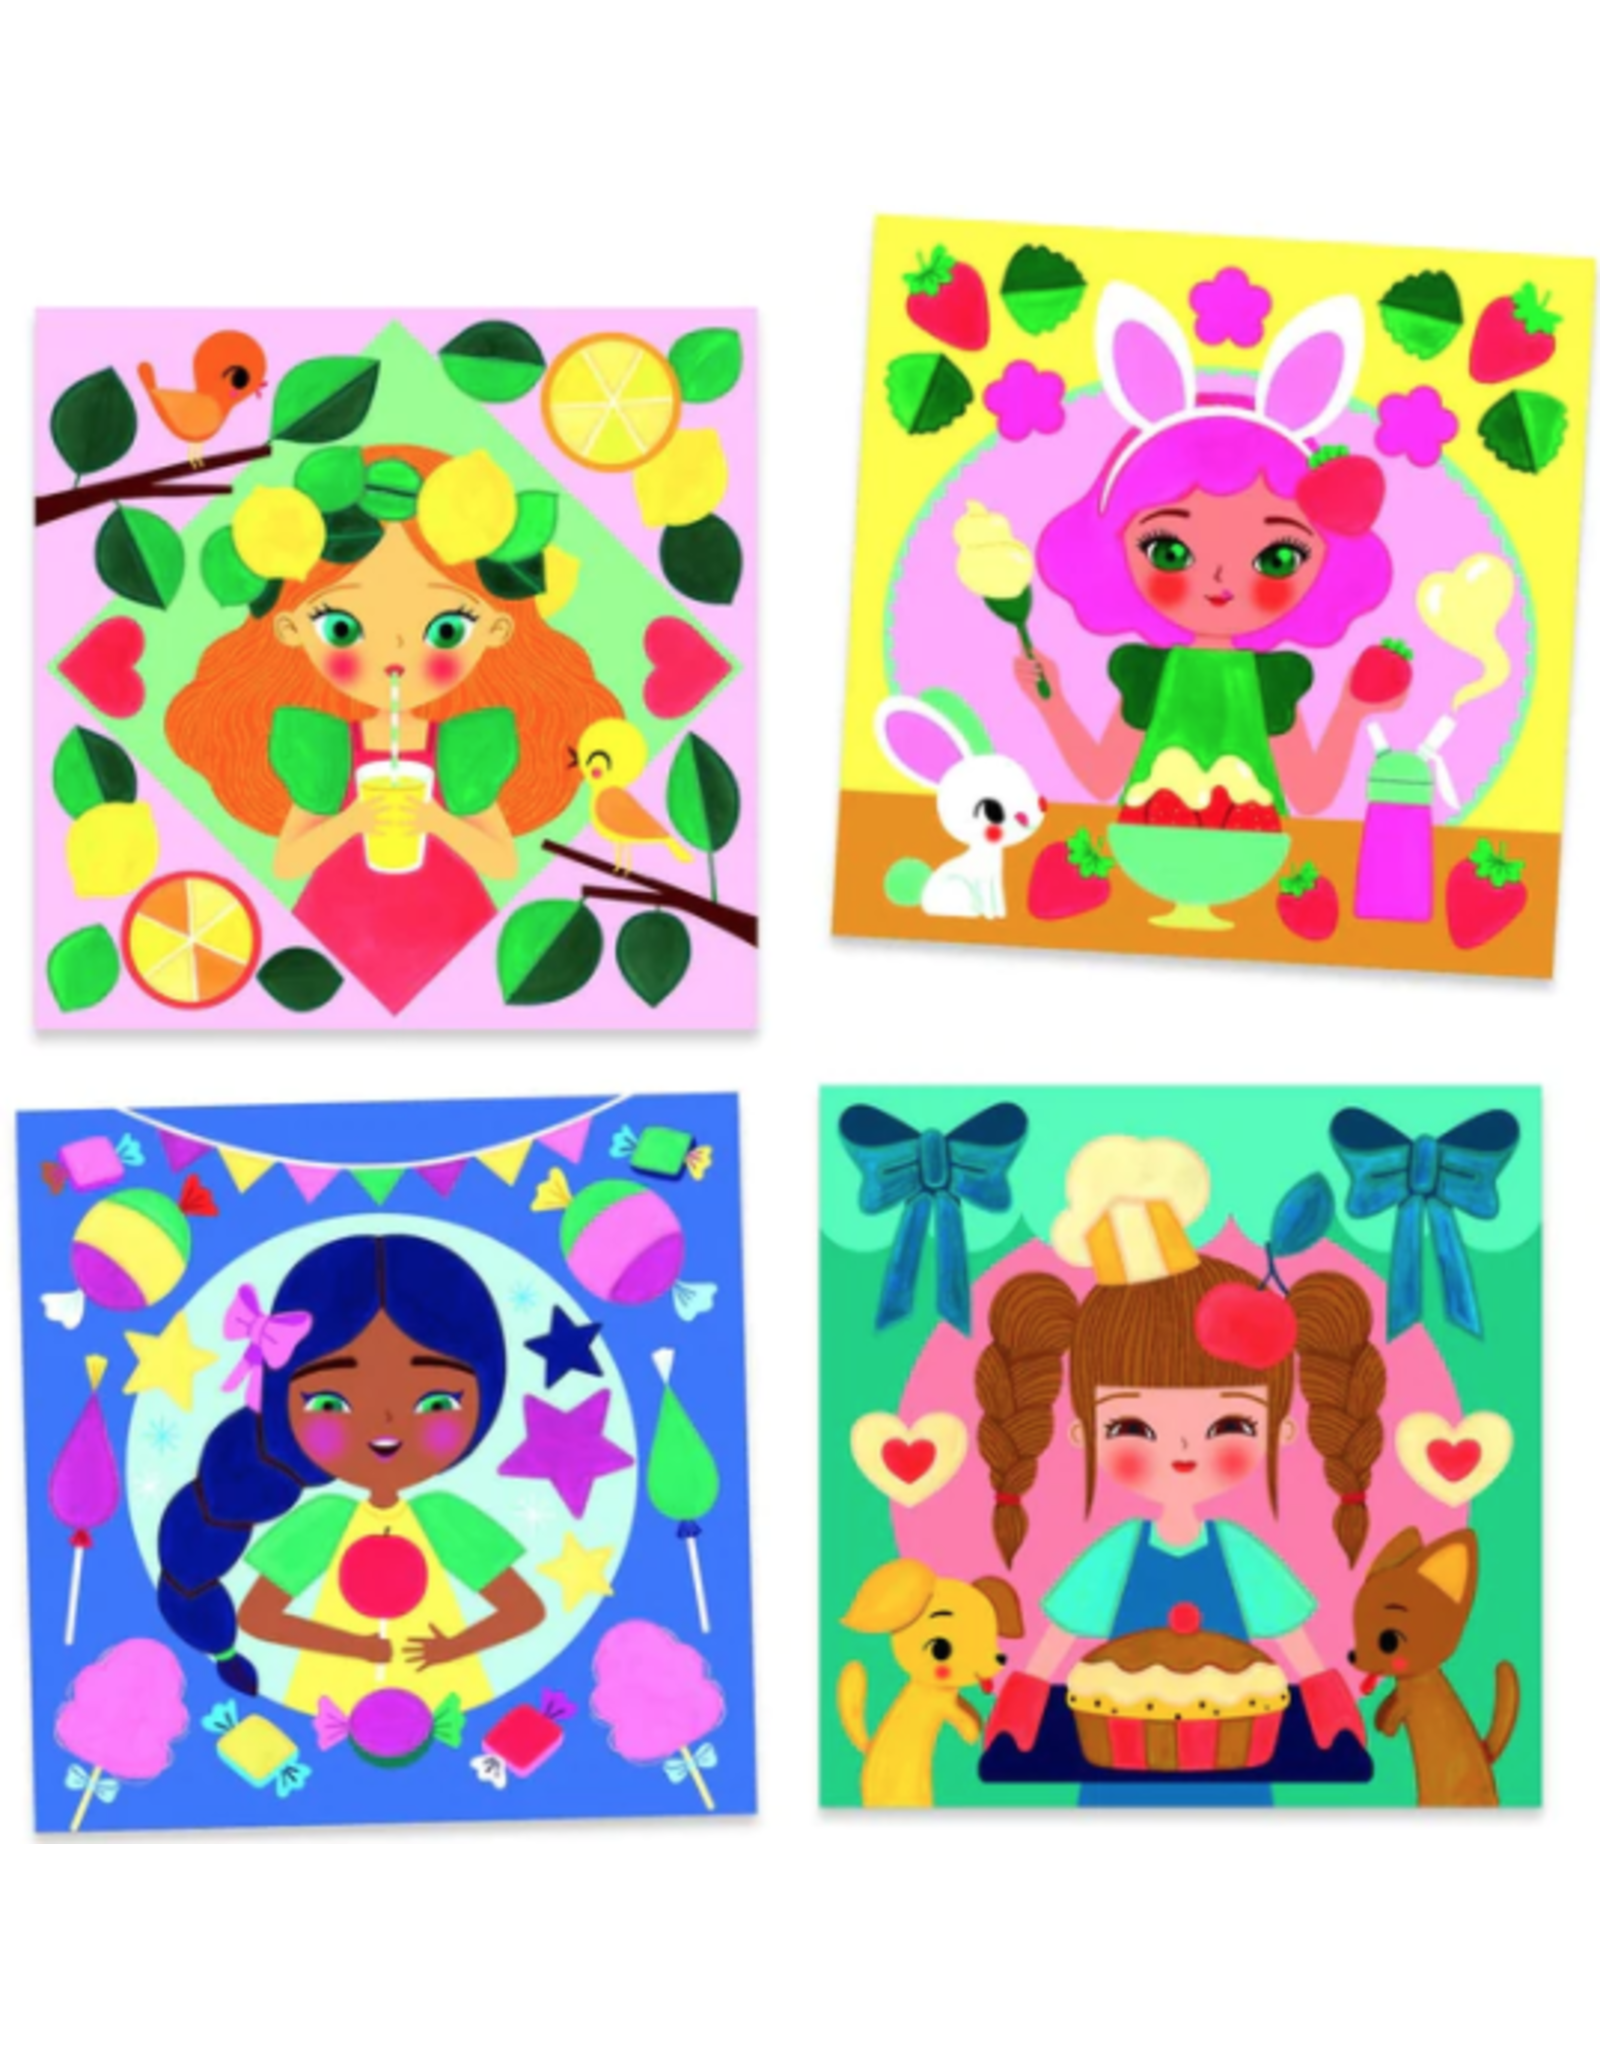 Djeco Cards to Paint Snack Time